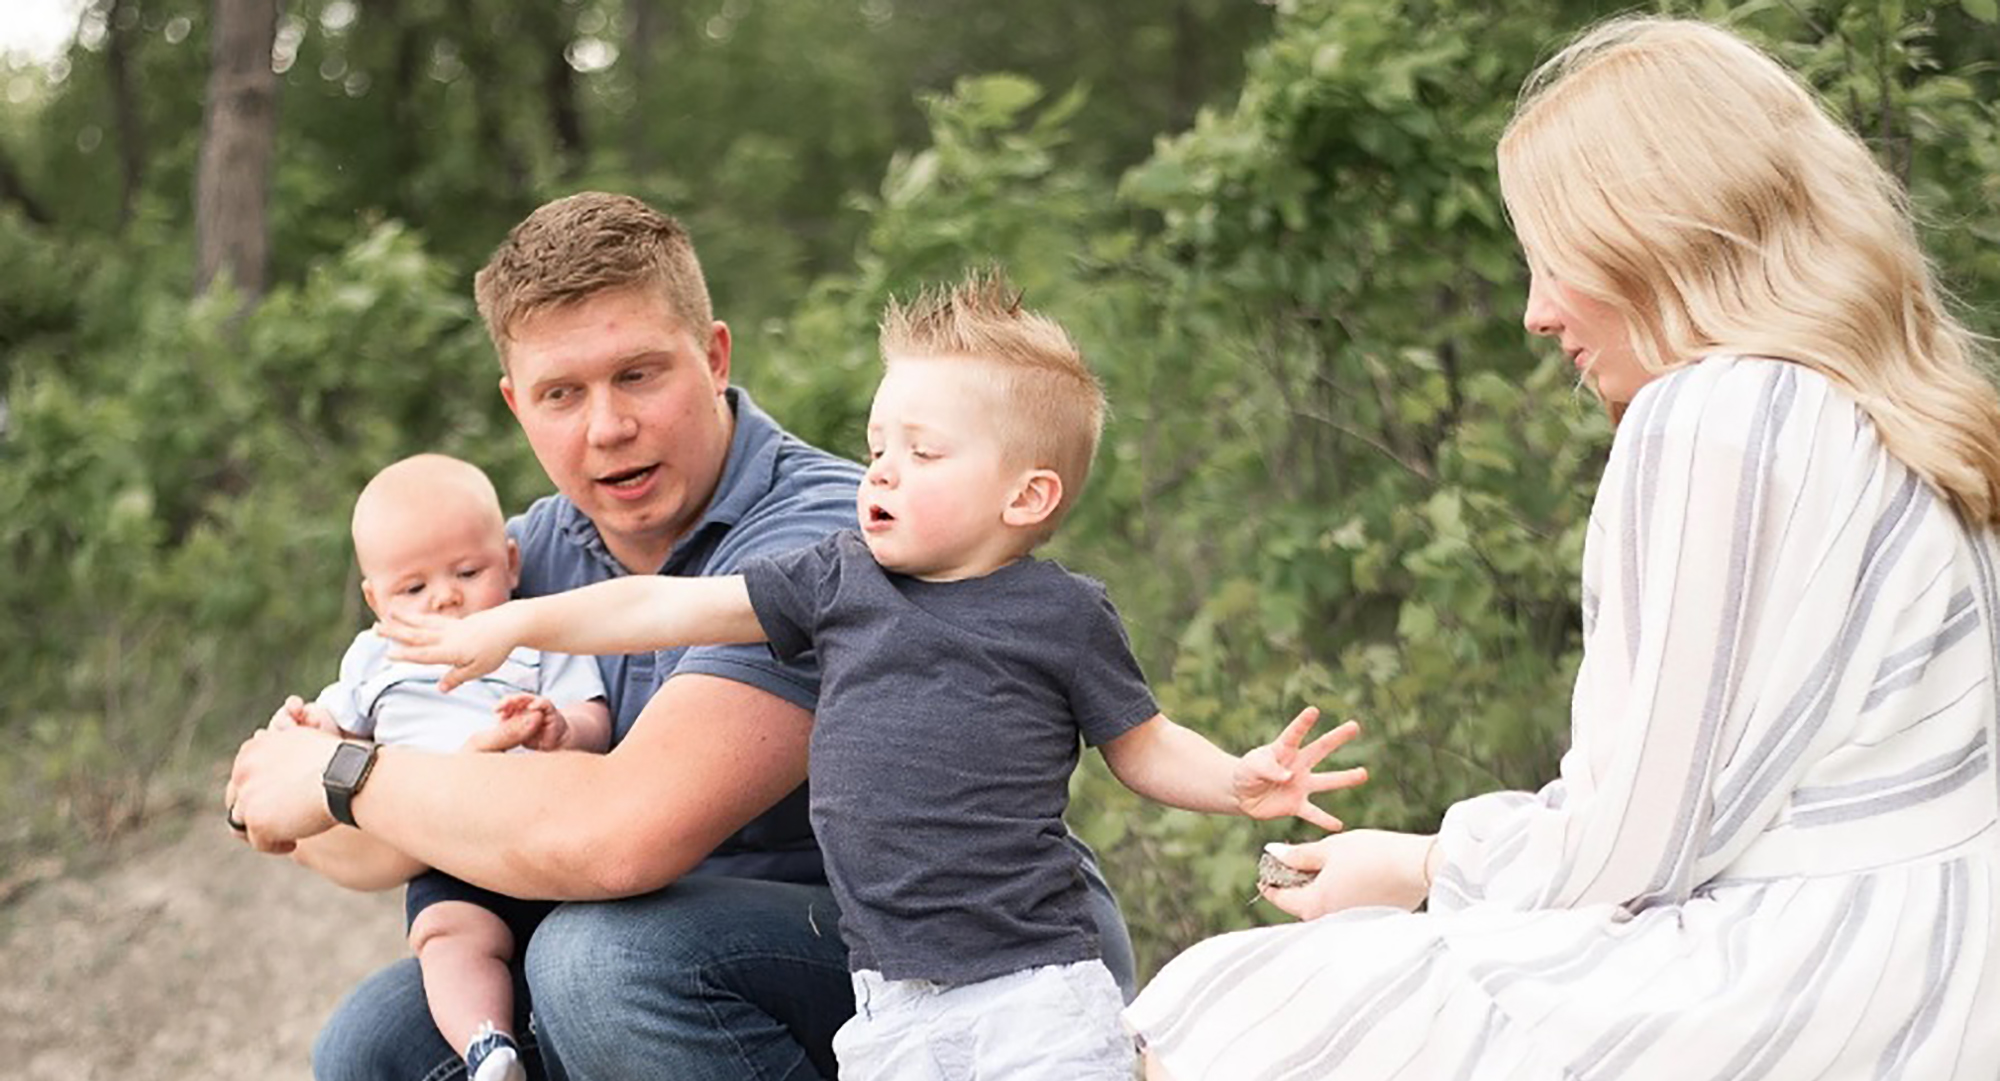 Senior Collin Thompson, left, is married to Alex Thompson, right. Thompson has a 3-year-old stepson Liam, center, and seven-month-old son Callum.